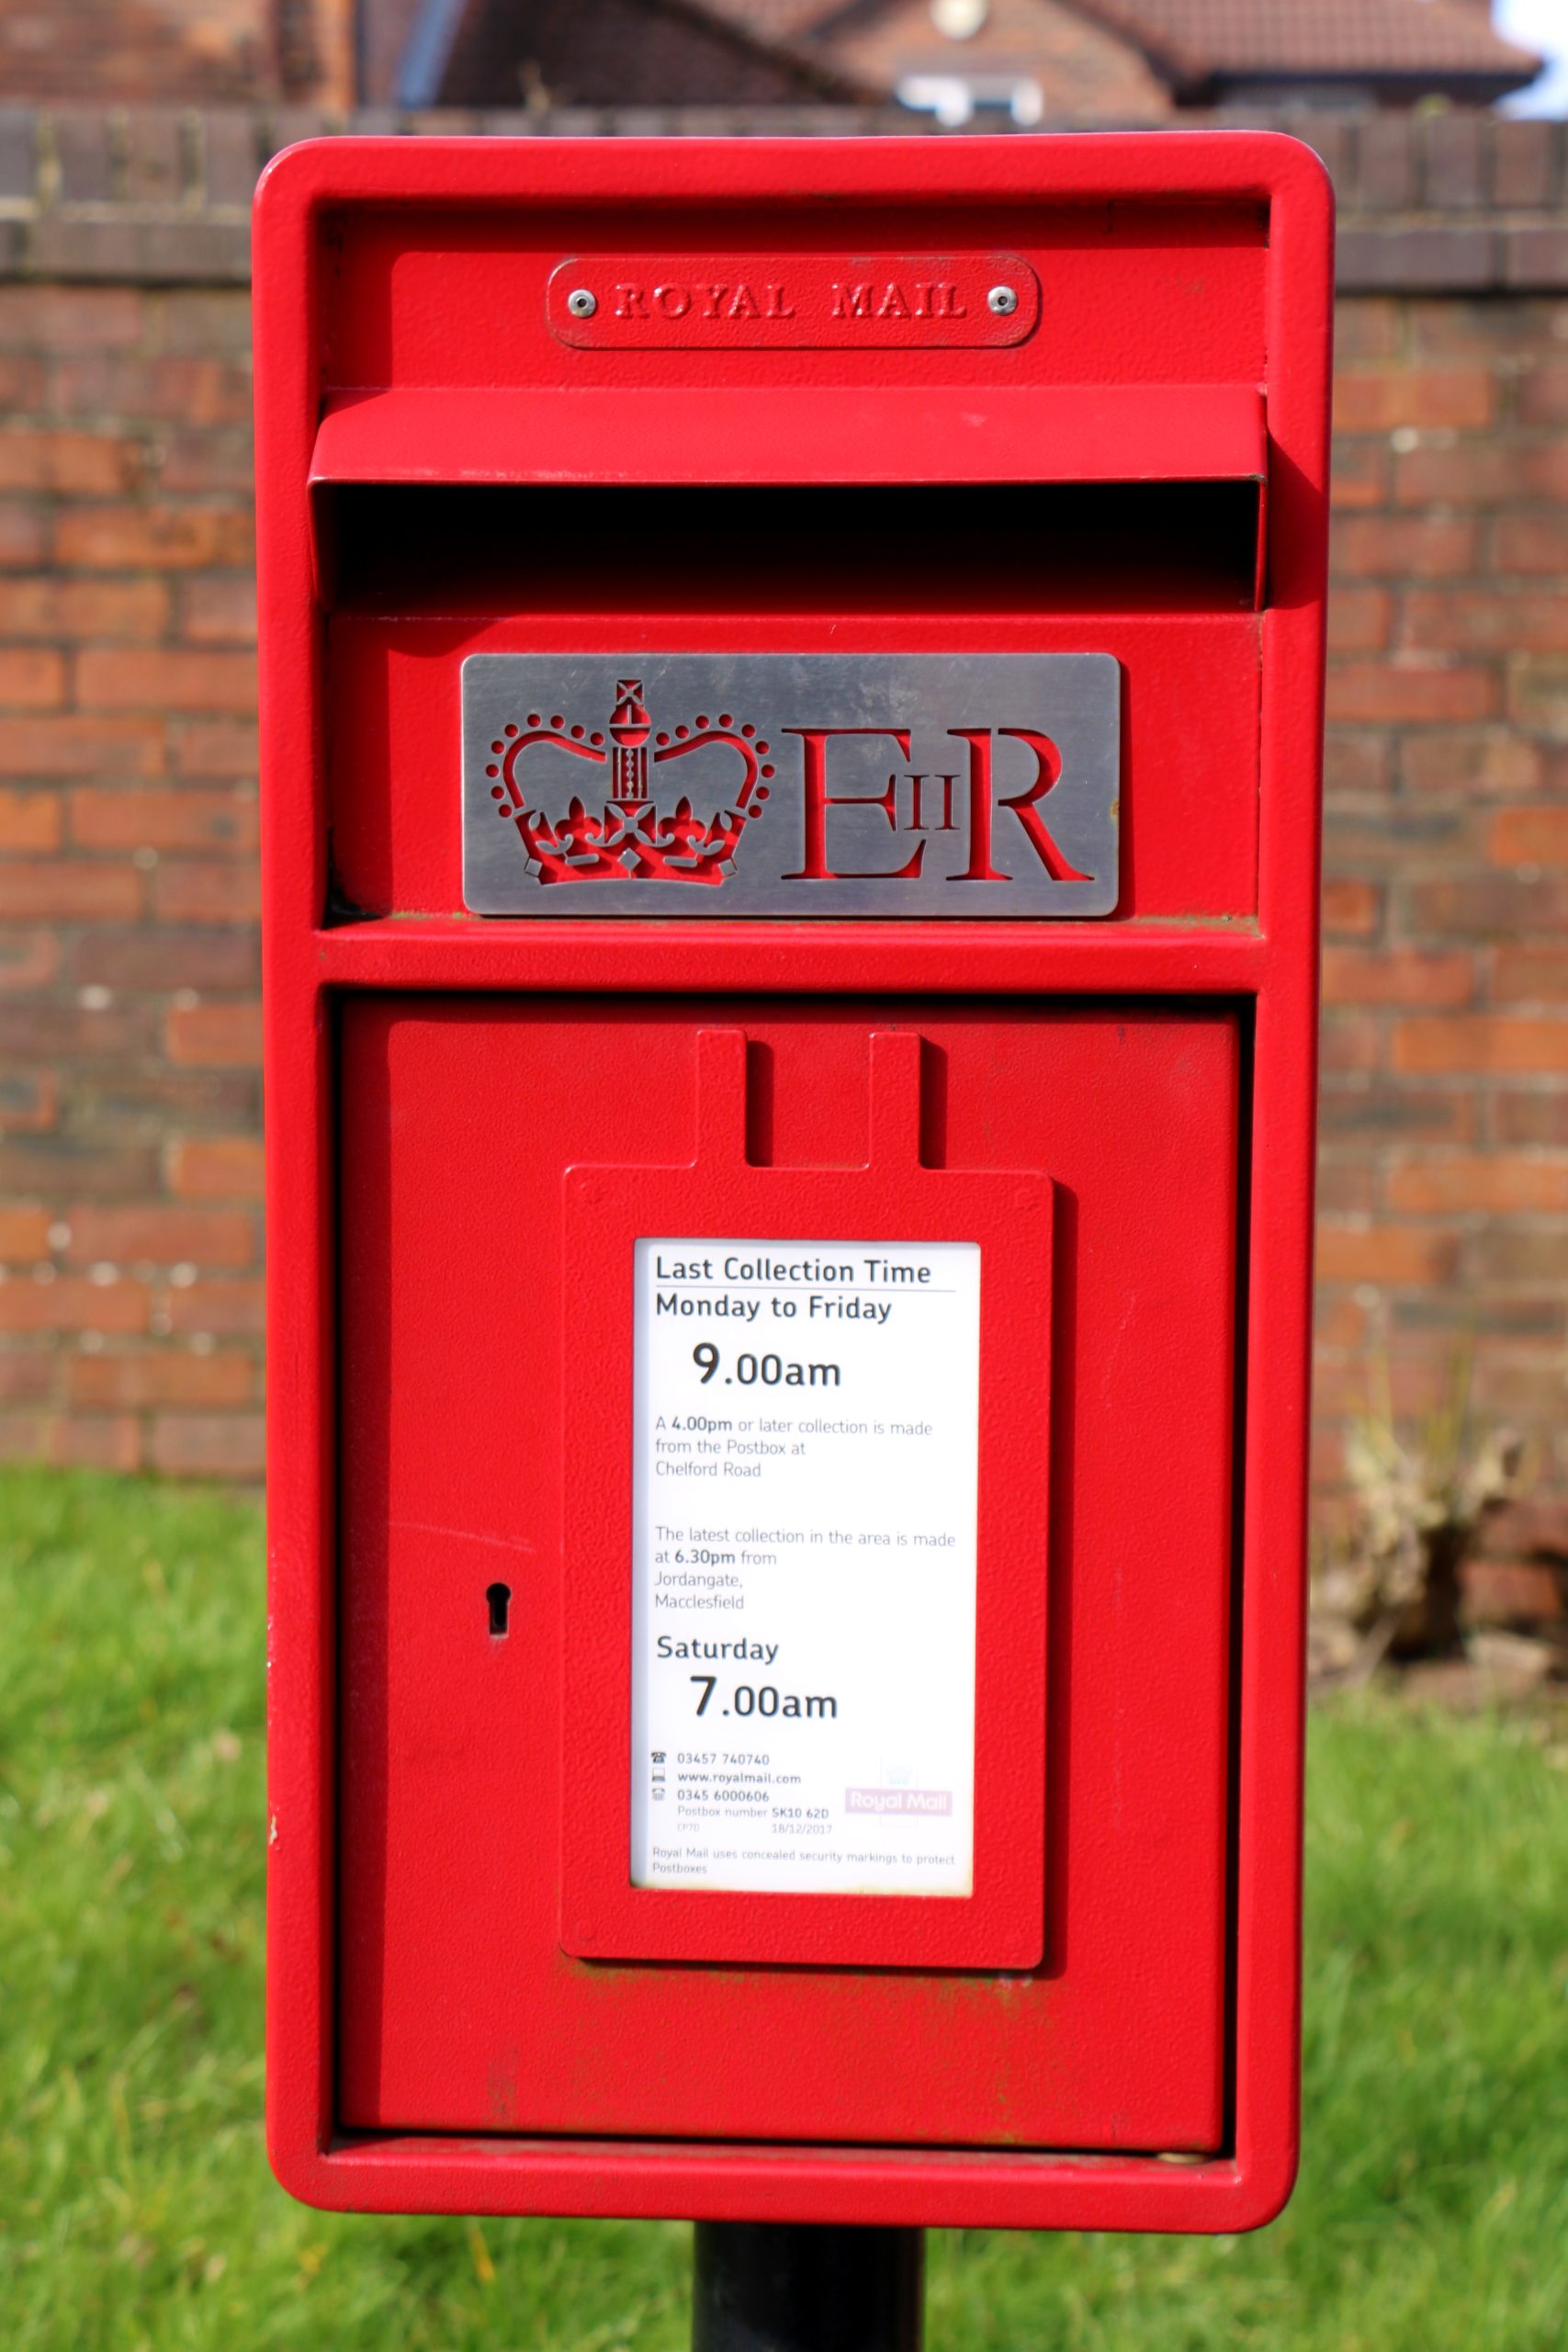 SEPTEMBER 2022 - WHAT DOES THE NEW KING MEAN FOR POST BOXES? - Letter Box  Study Group